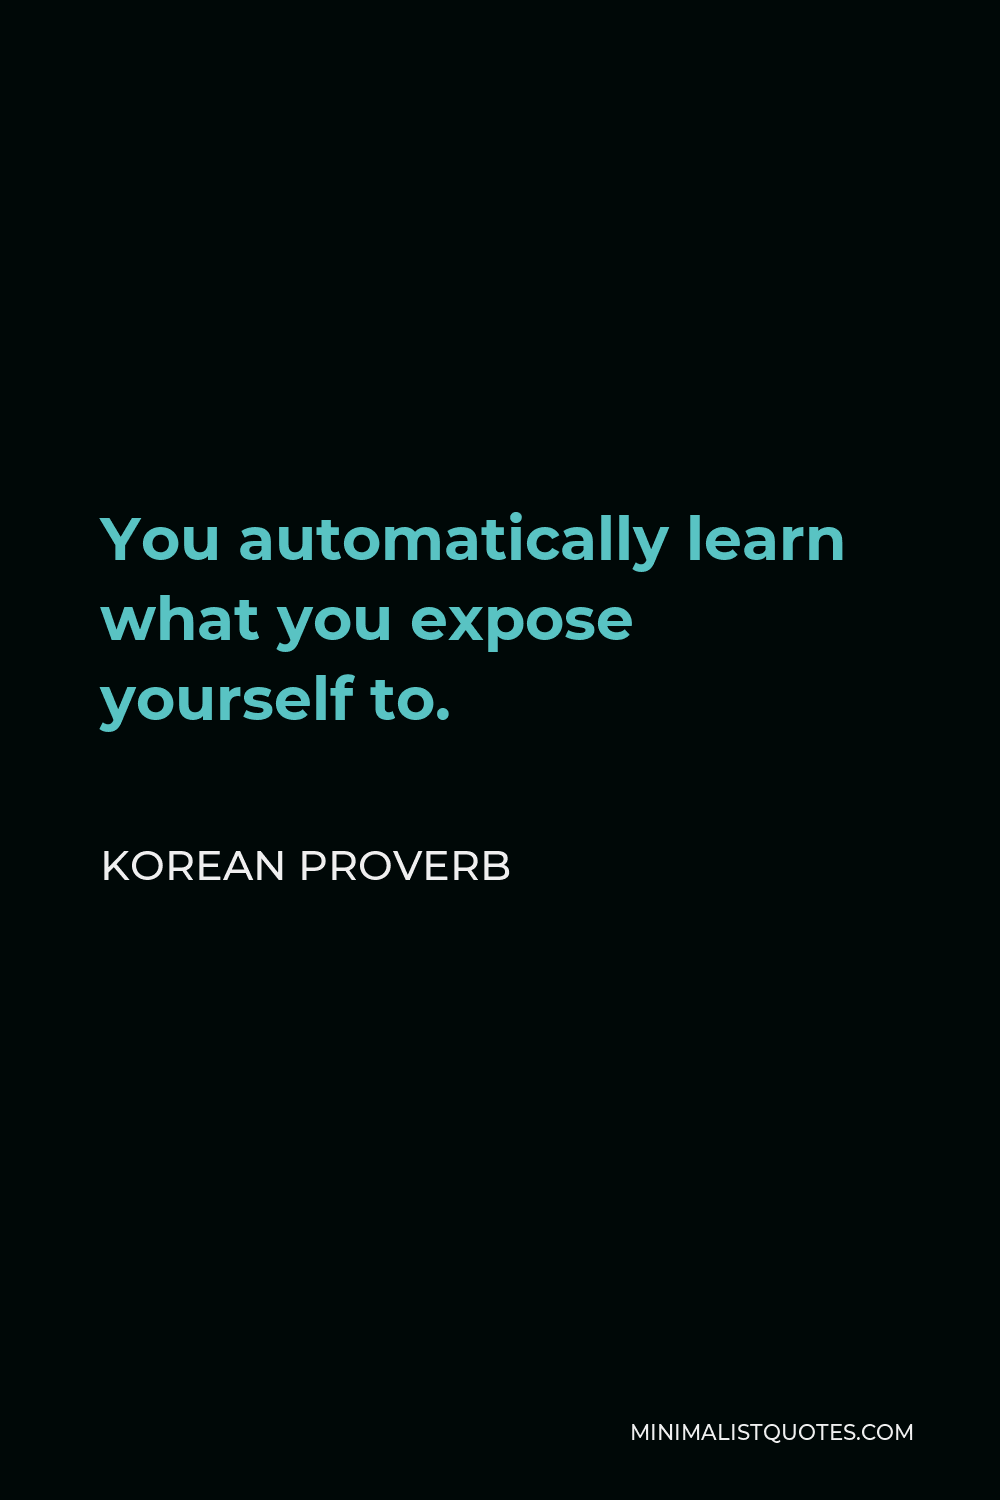 Korean Proverb Quote - You automatically learn what you expose yourself to.